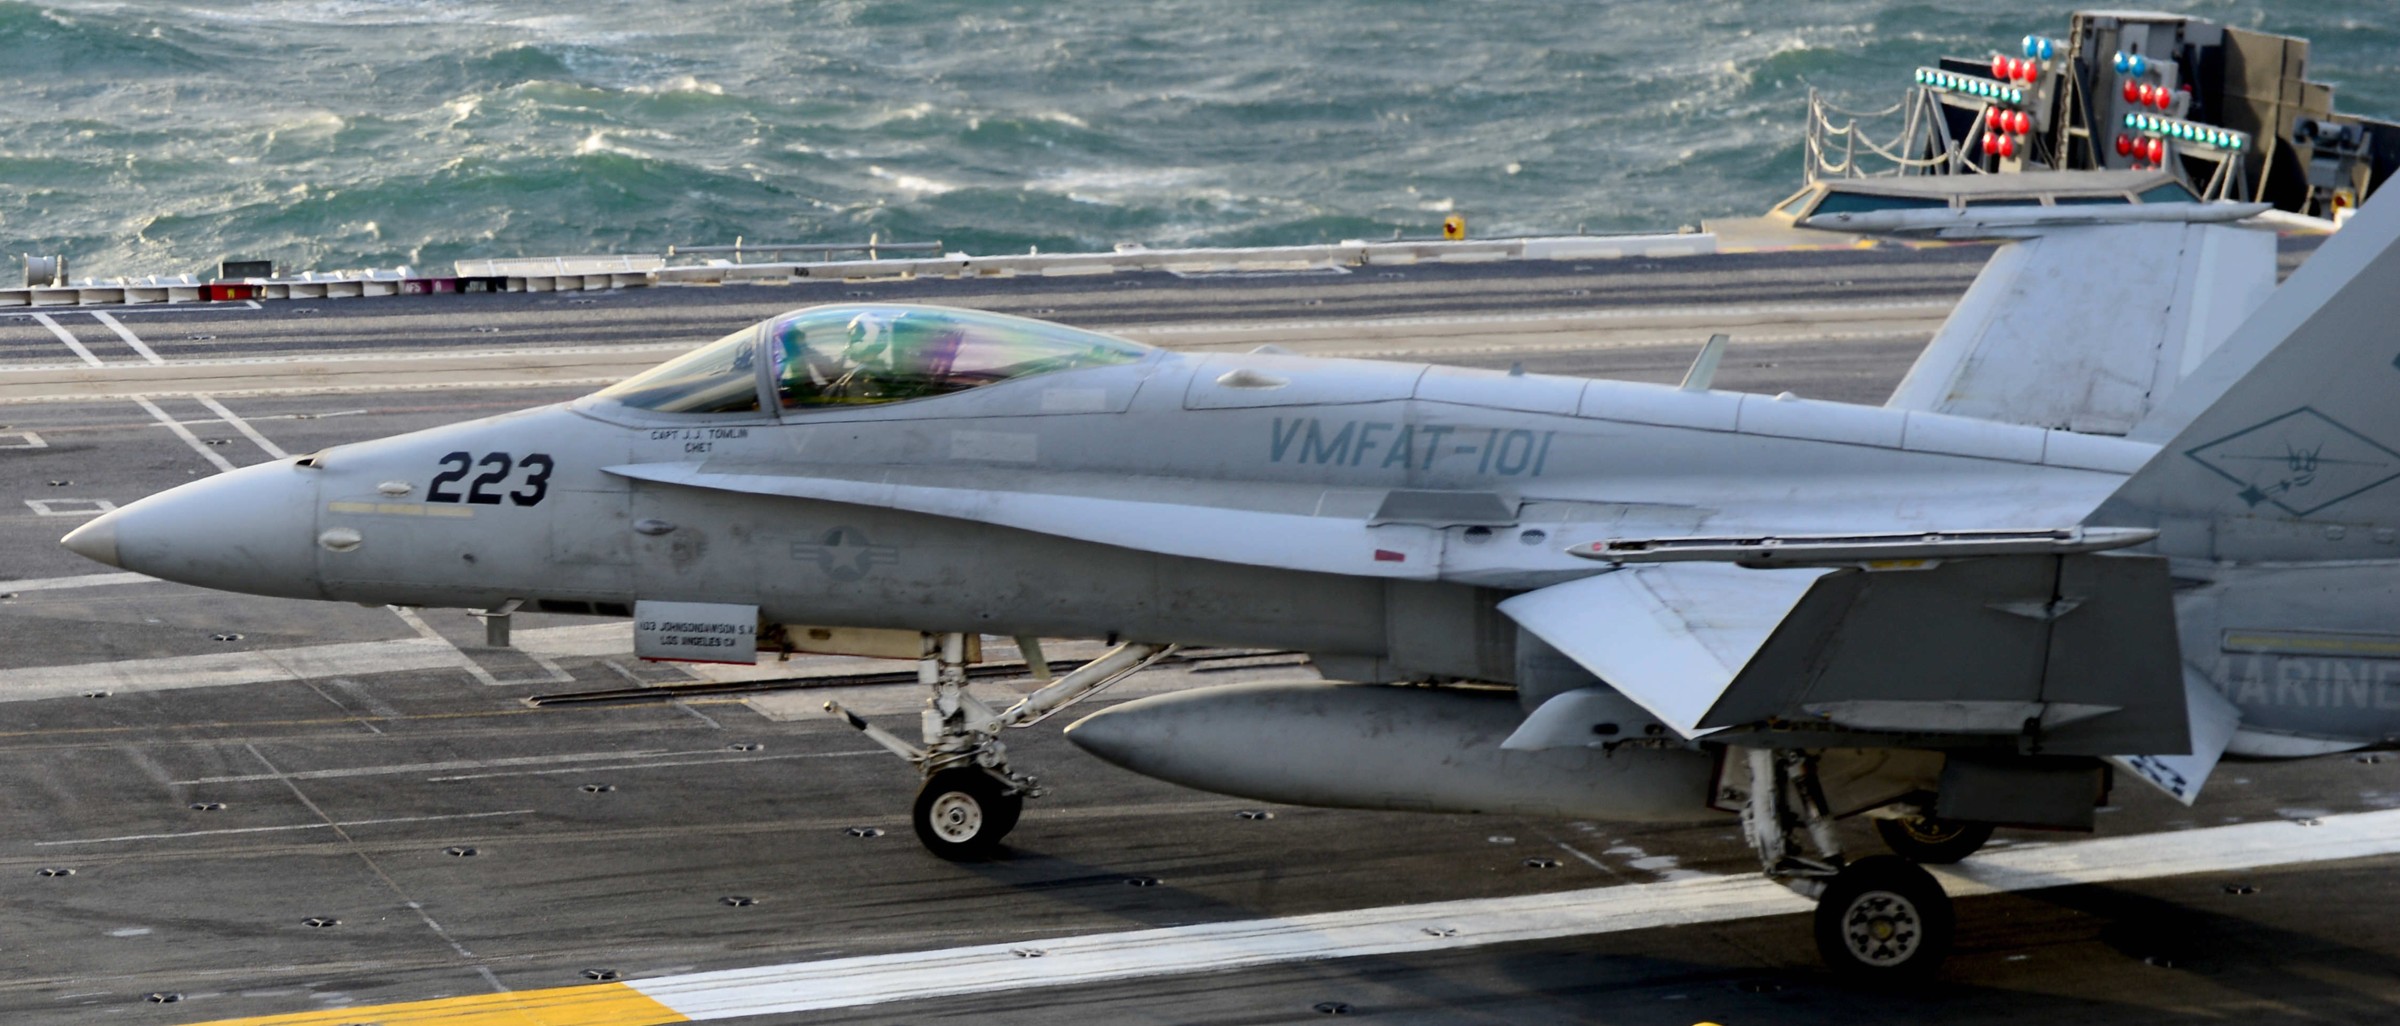 vmfat-101 sharpshooters marine fighter attack training squadron f/a-18c hornet 27